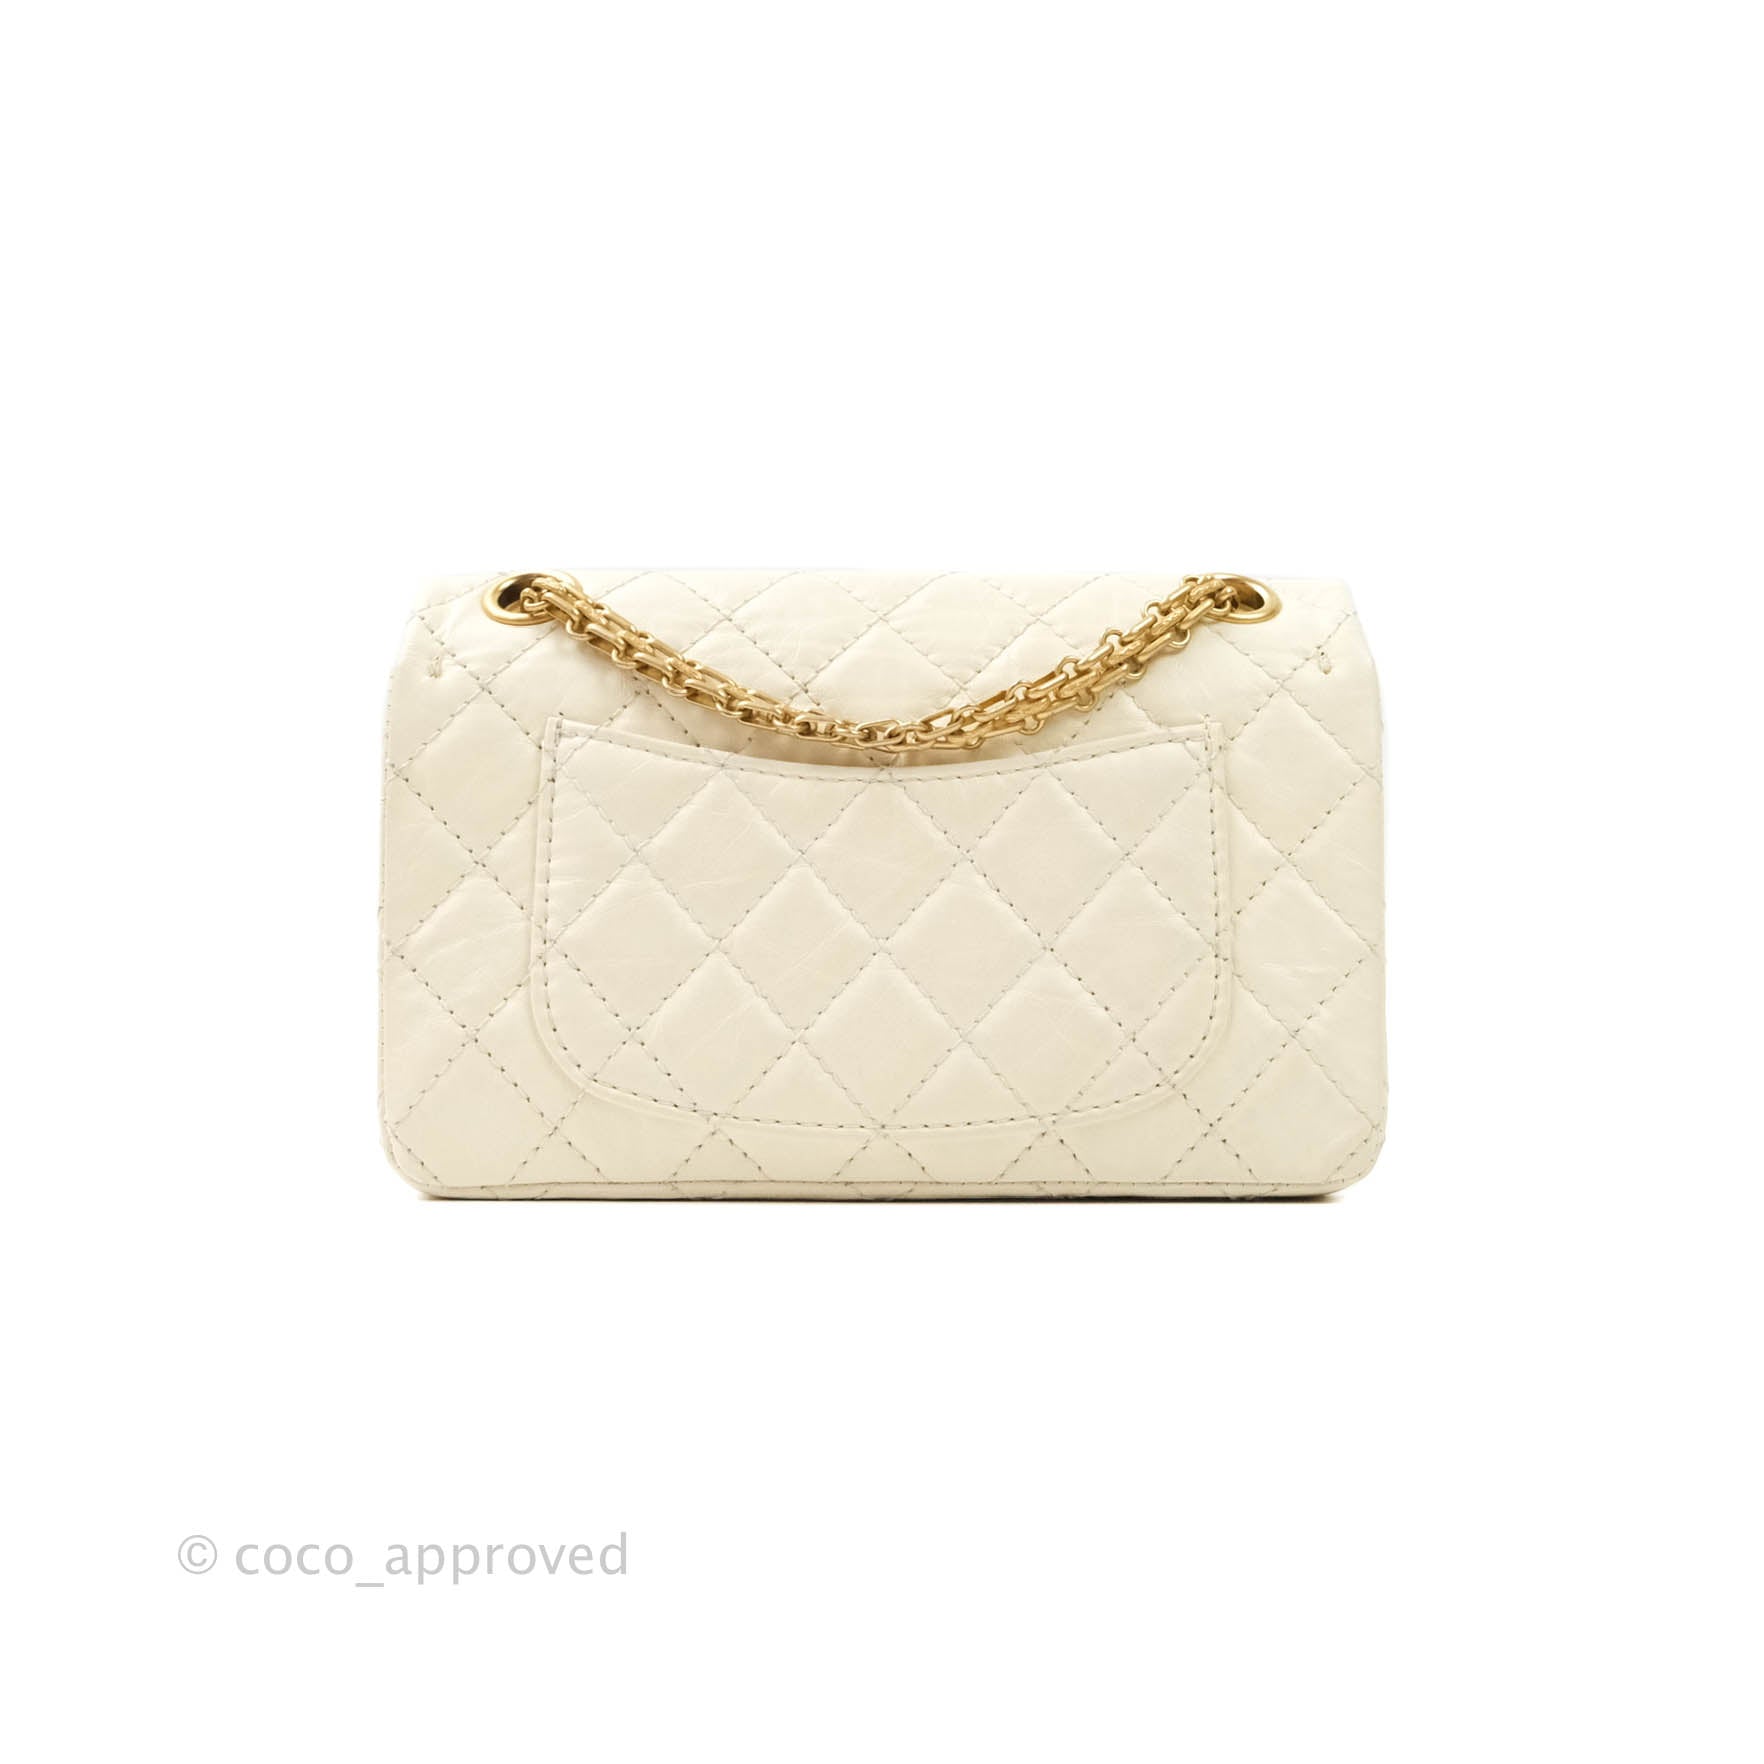 Chanel Mini Business Affinity in Caramel / LGHW, Luxury, Bags